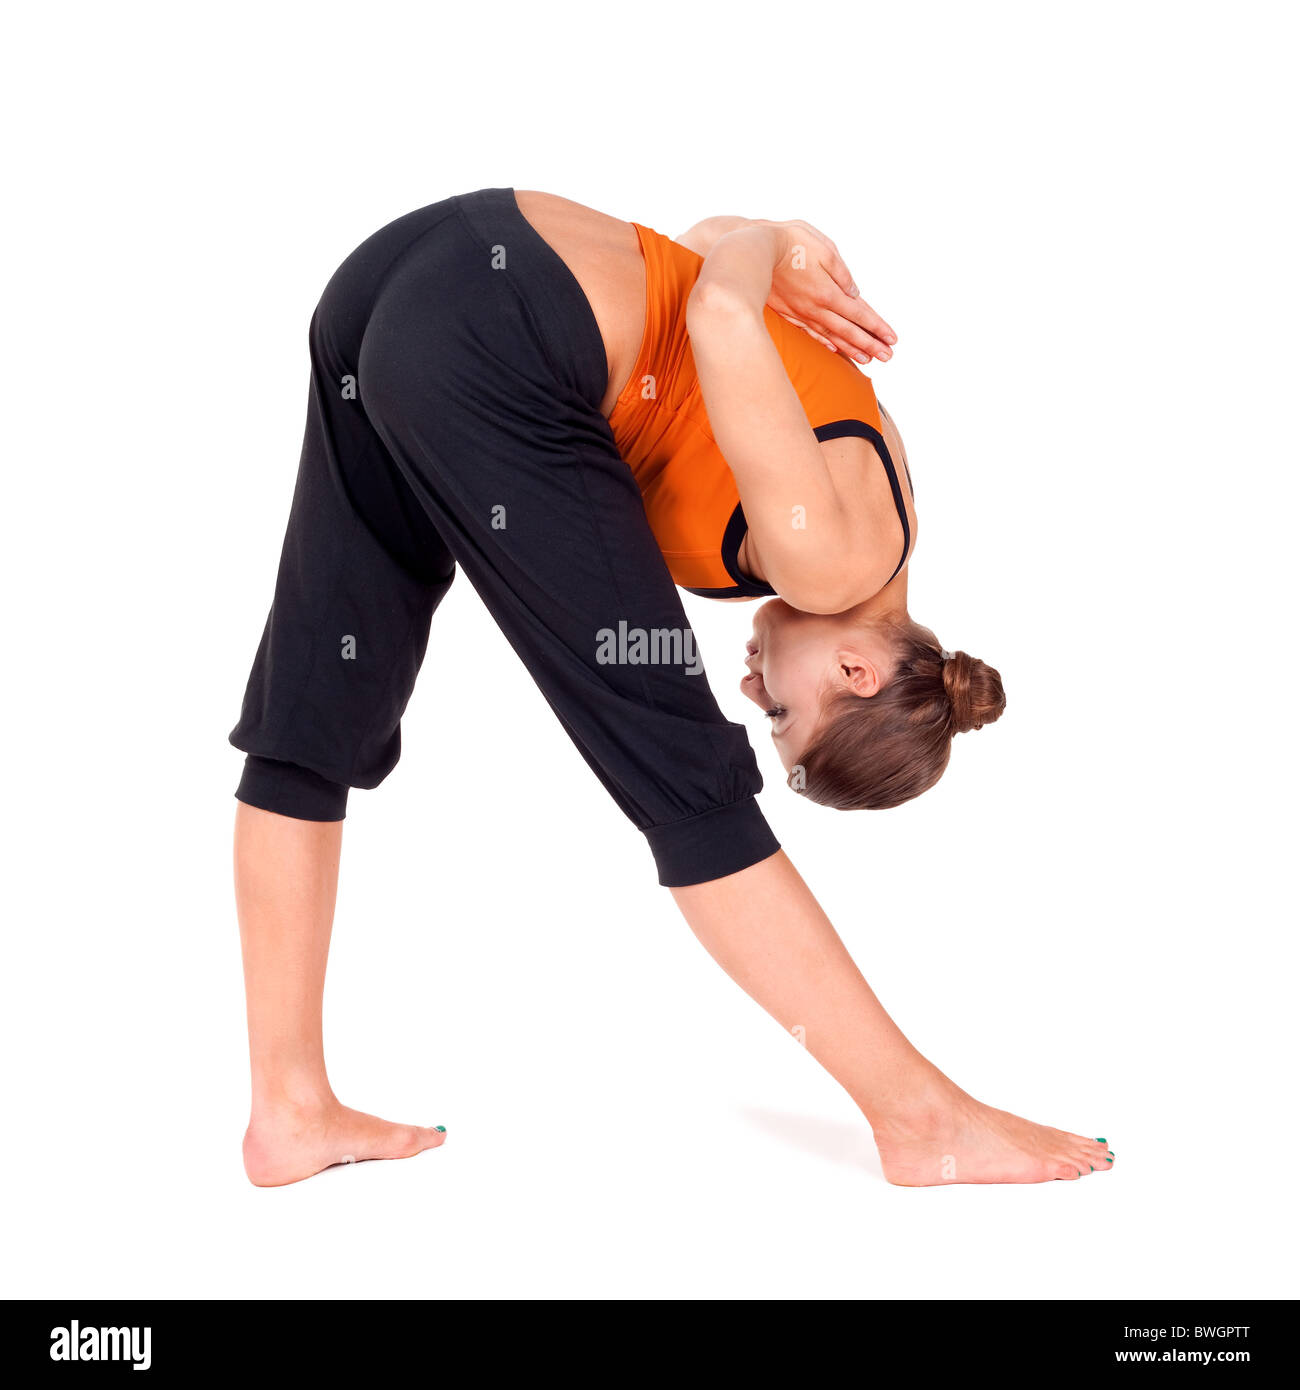 Woman Doing Intense Side Stretch Yoga Exercise Stock Photo by ©rognar  3831566